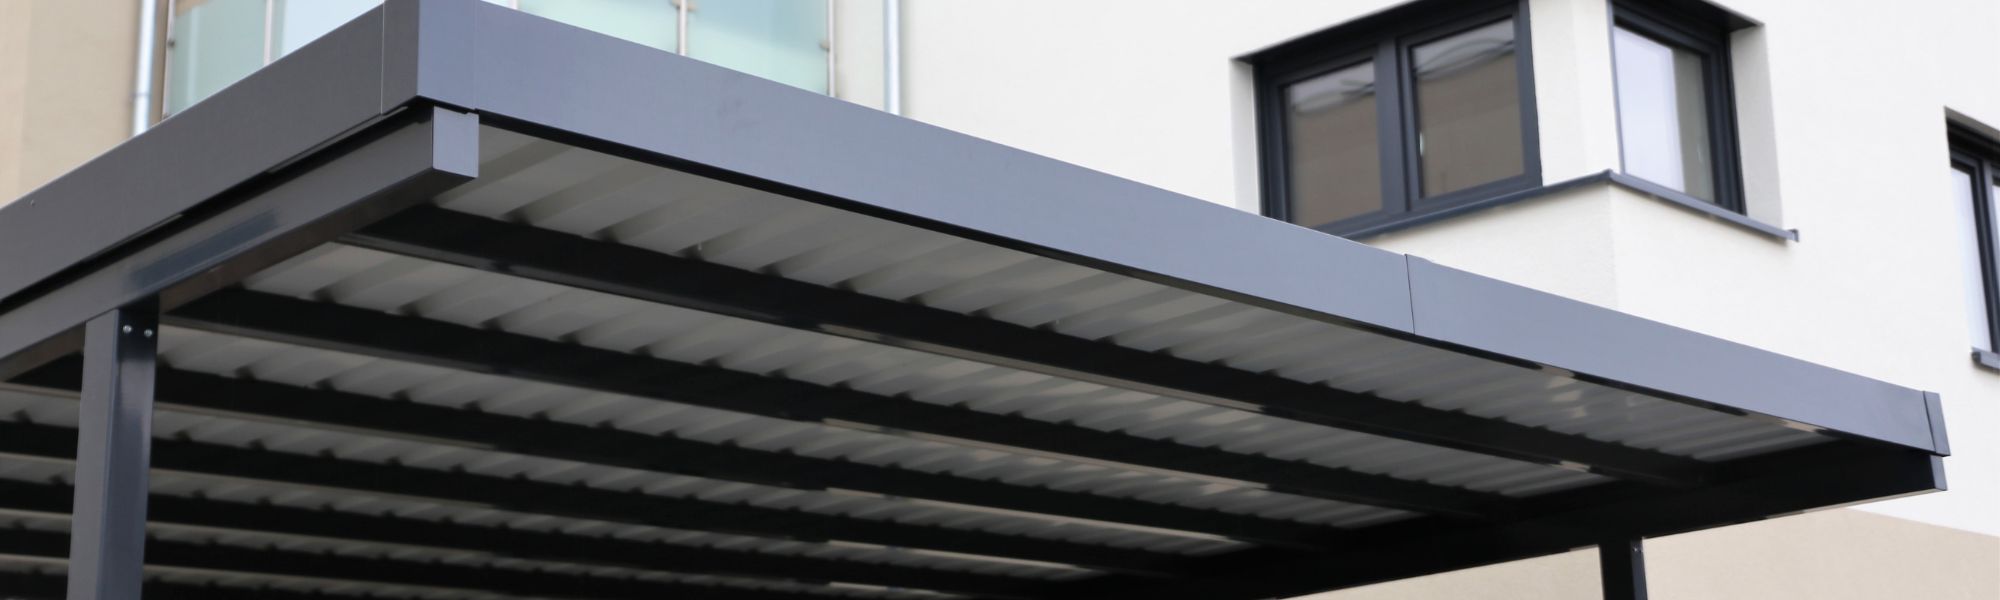 aluminum deck covers and canopy (1)